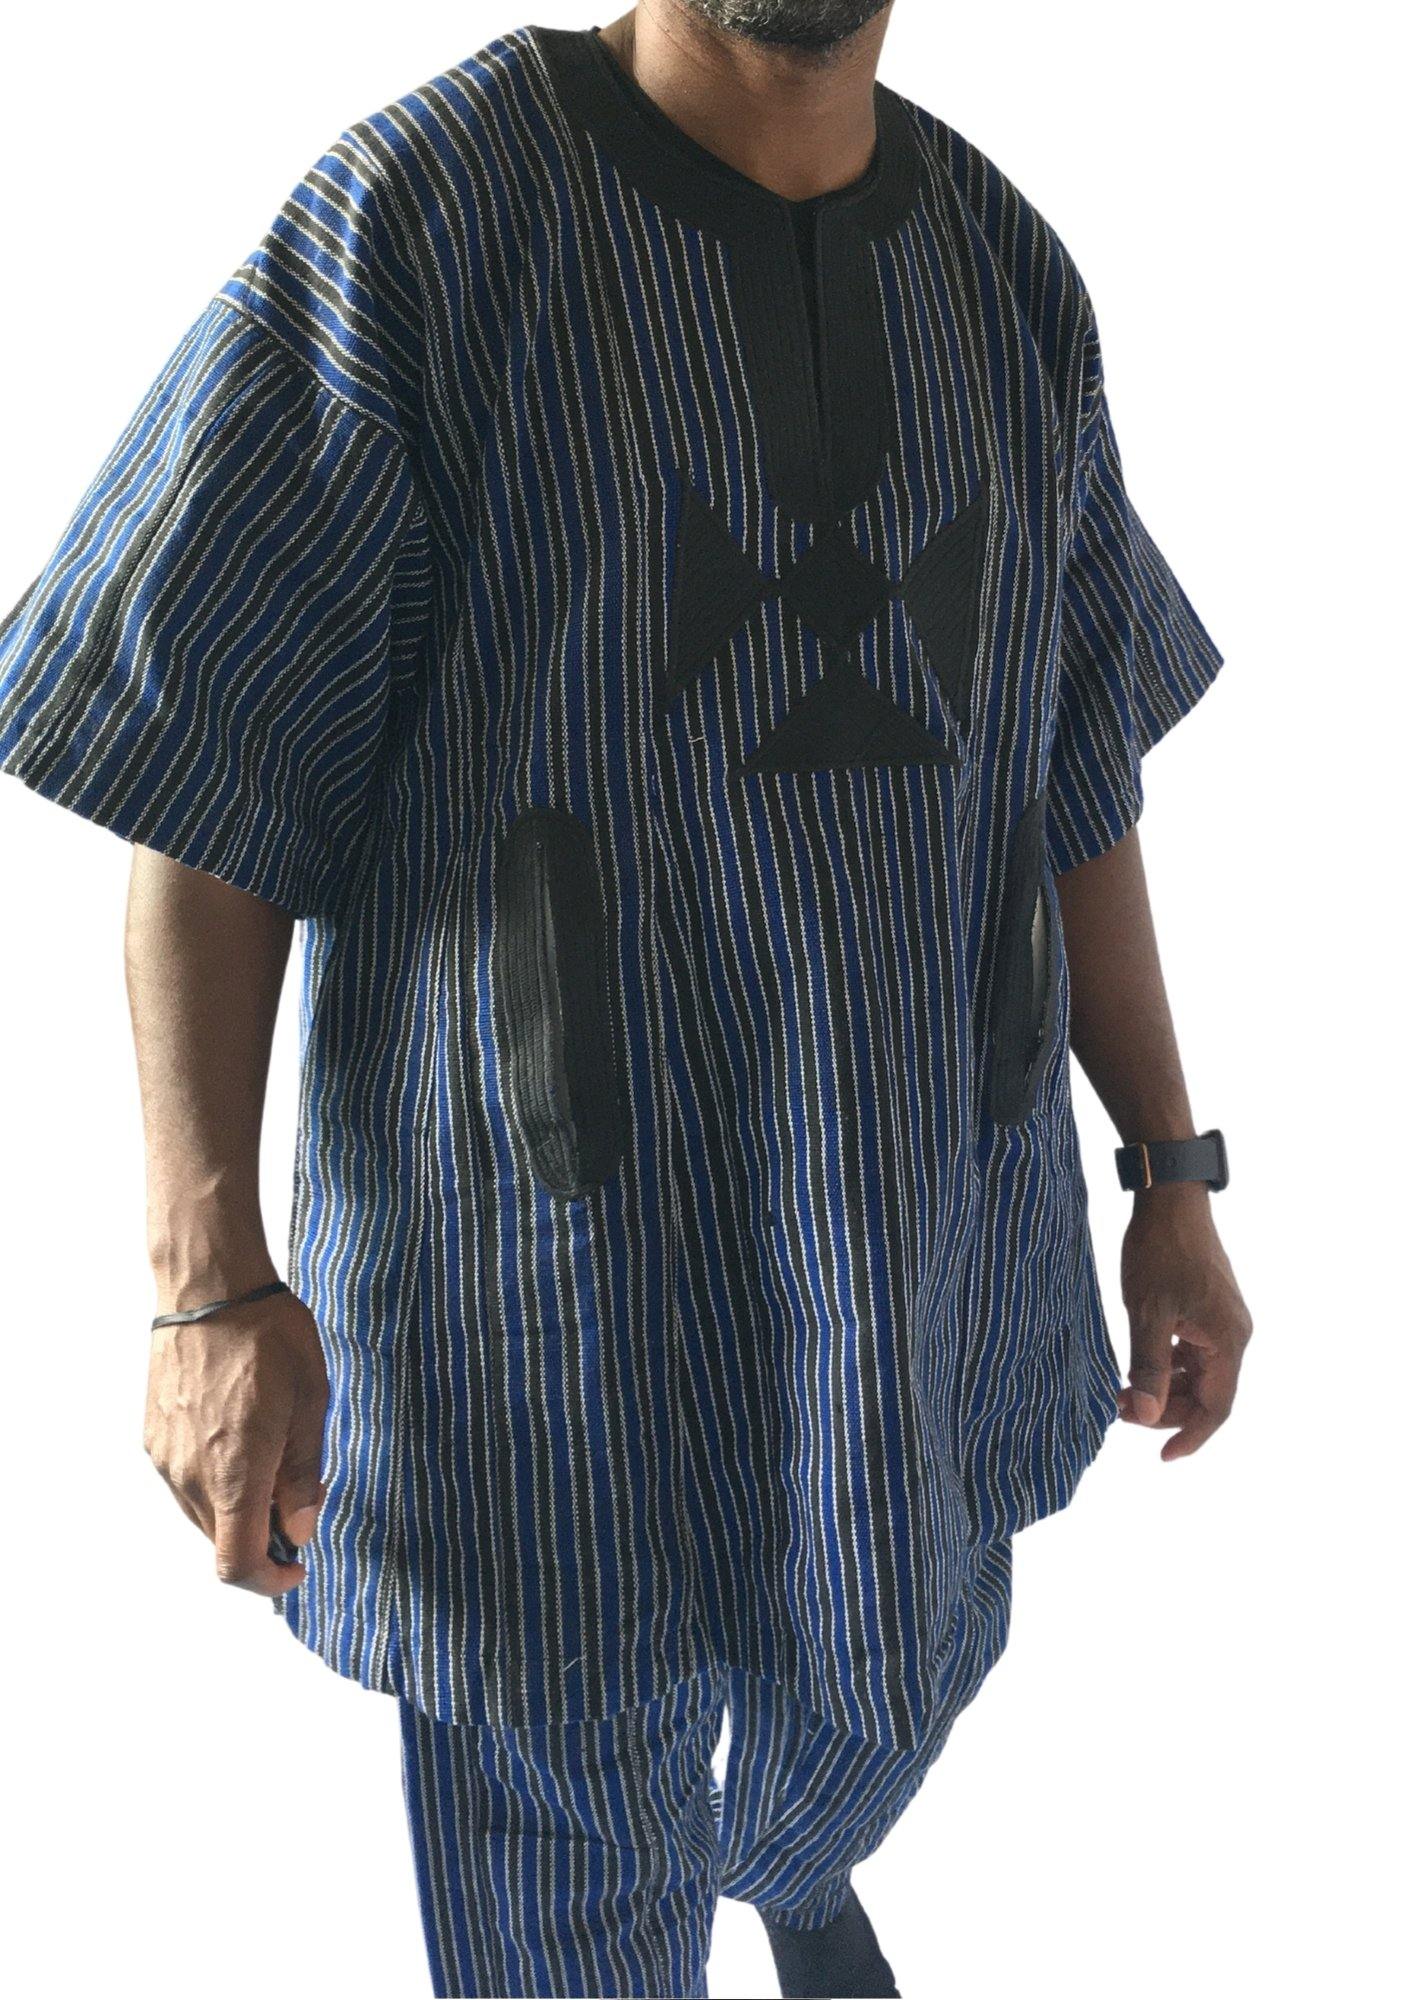 African Woven Tops and Bottoms Ensemble -Contemporary and Colorful Ensemble-African apparel and accessories